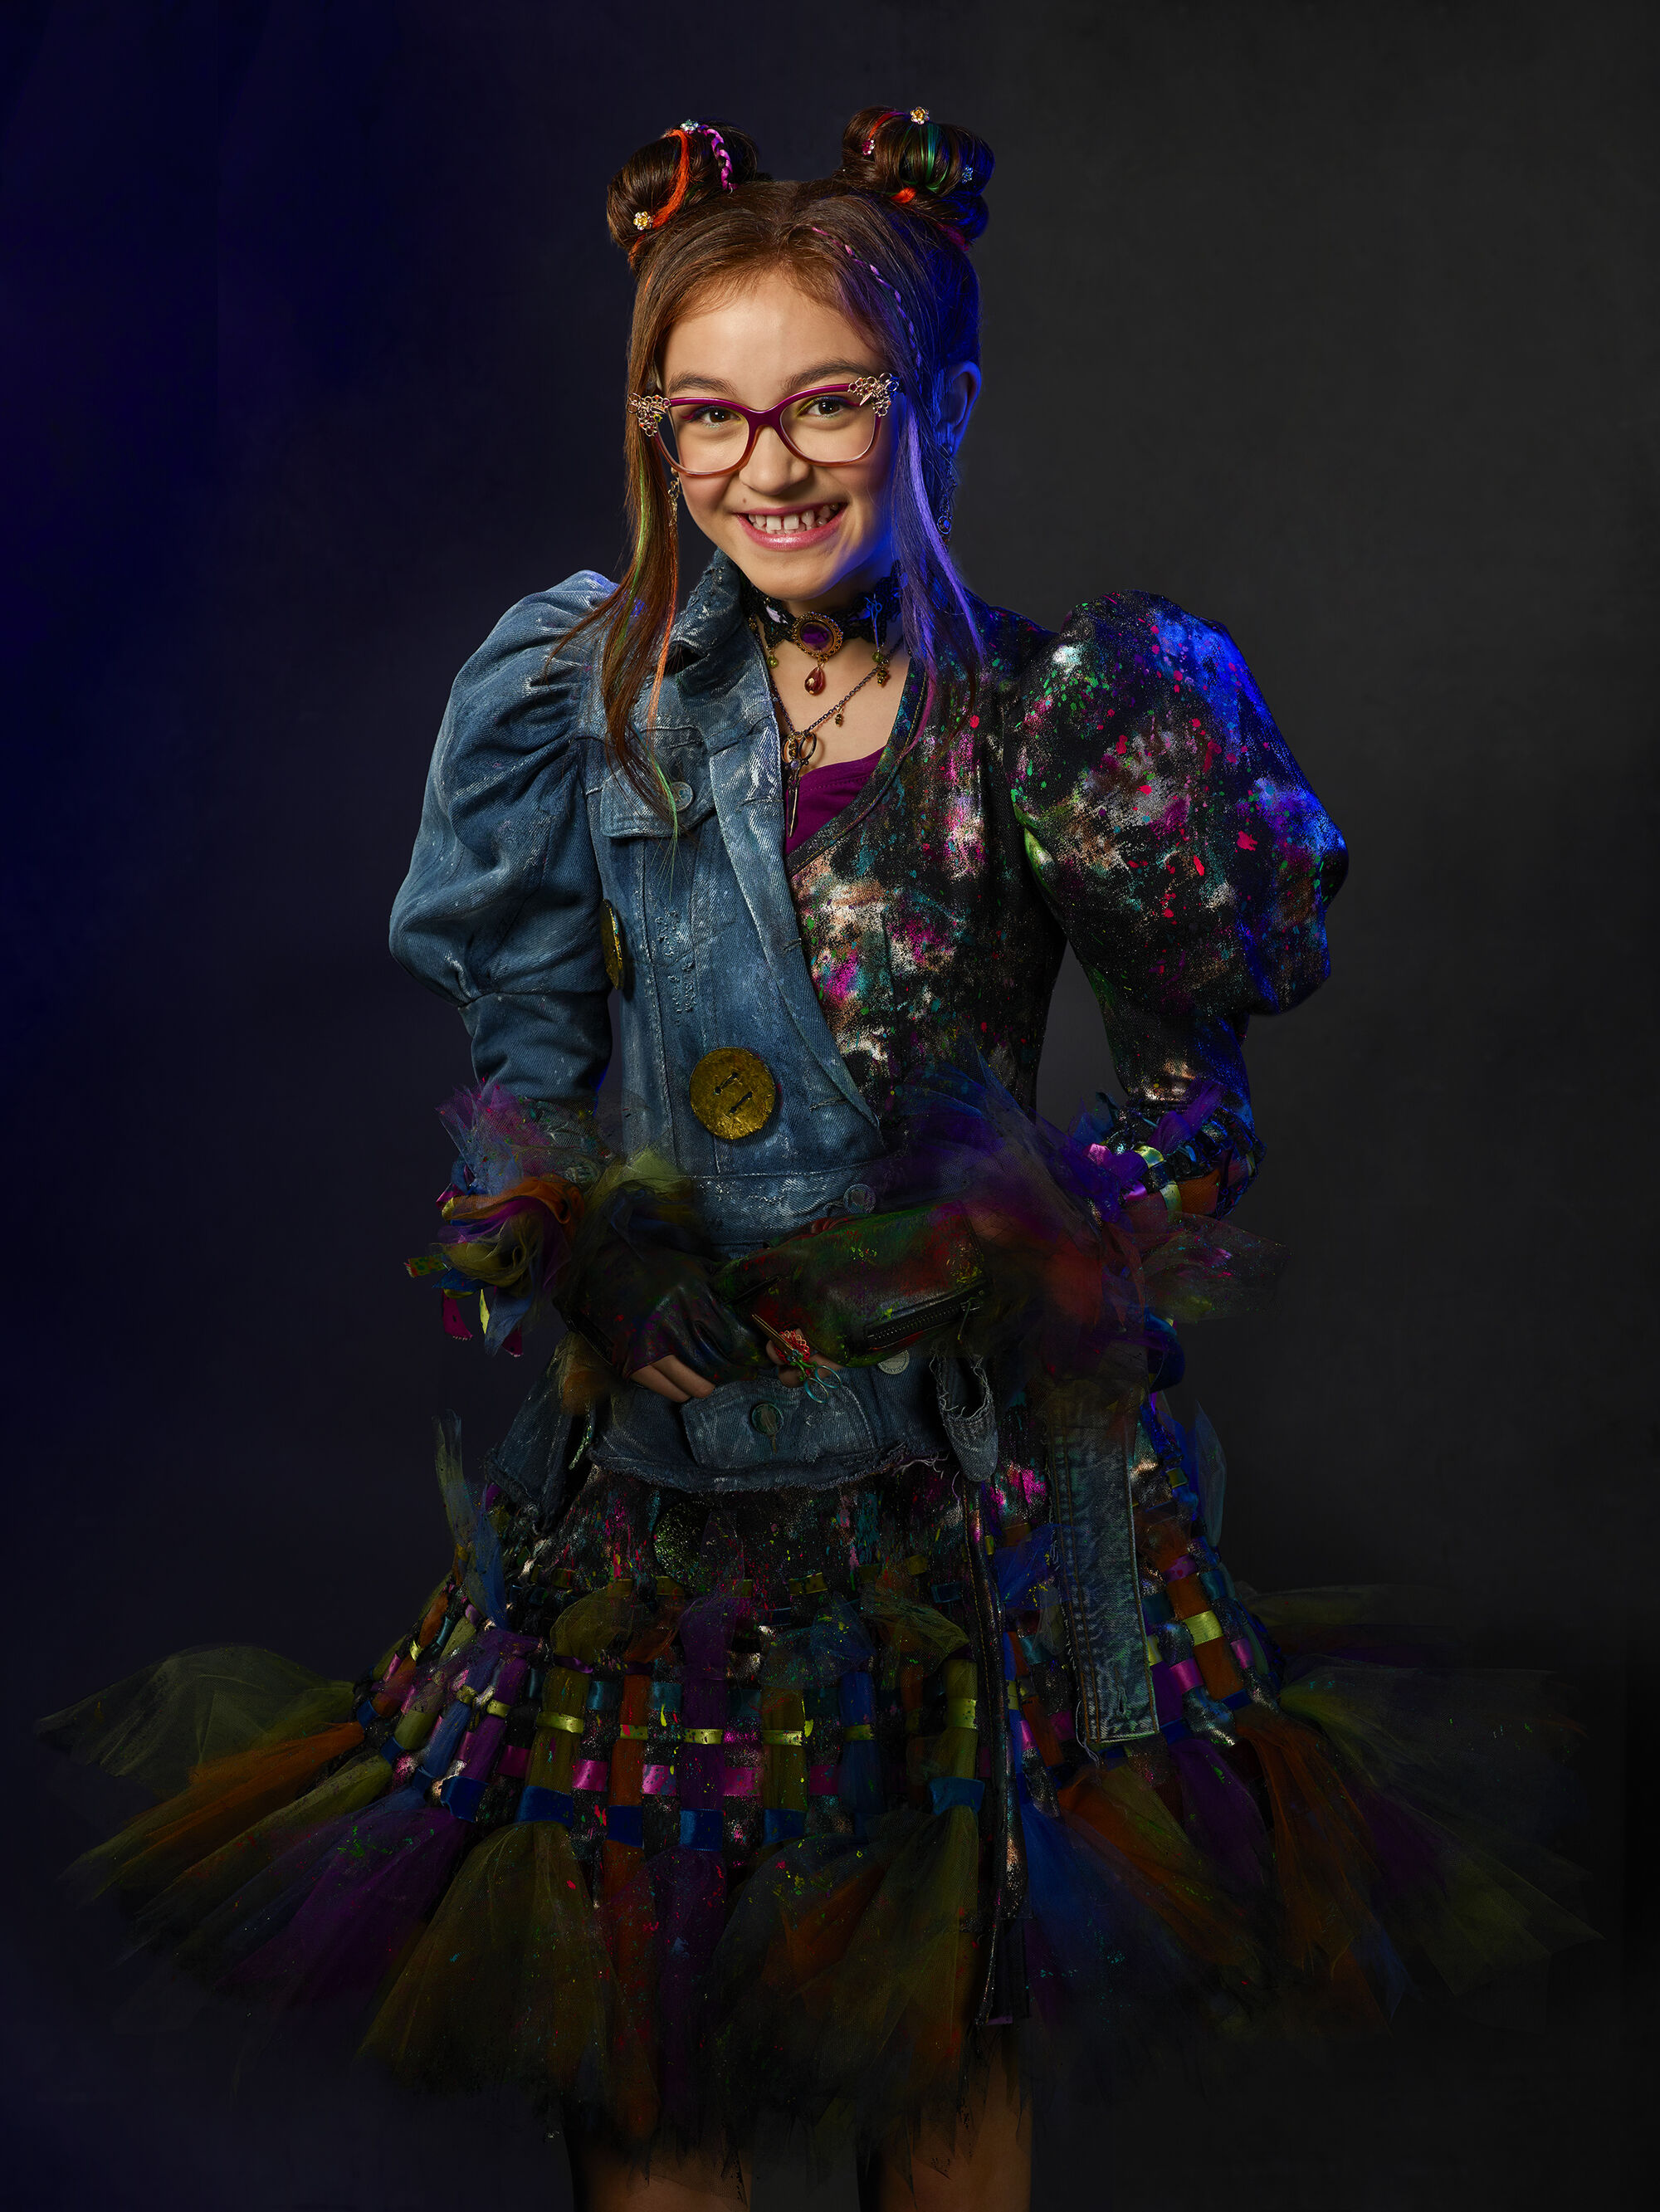 Everything you need to know about Dizzy Tremaine from Descendants.